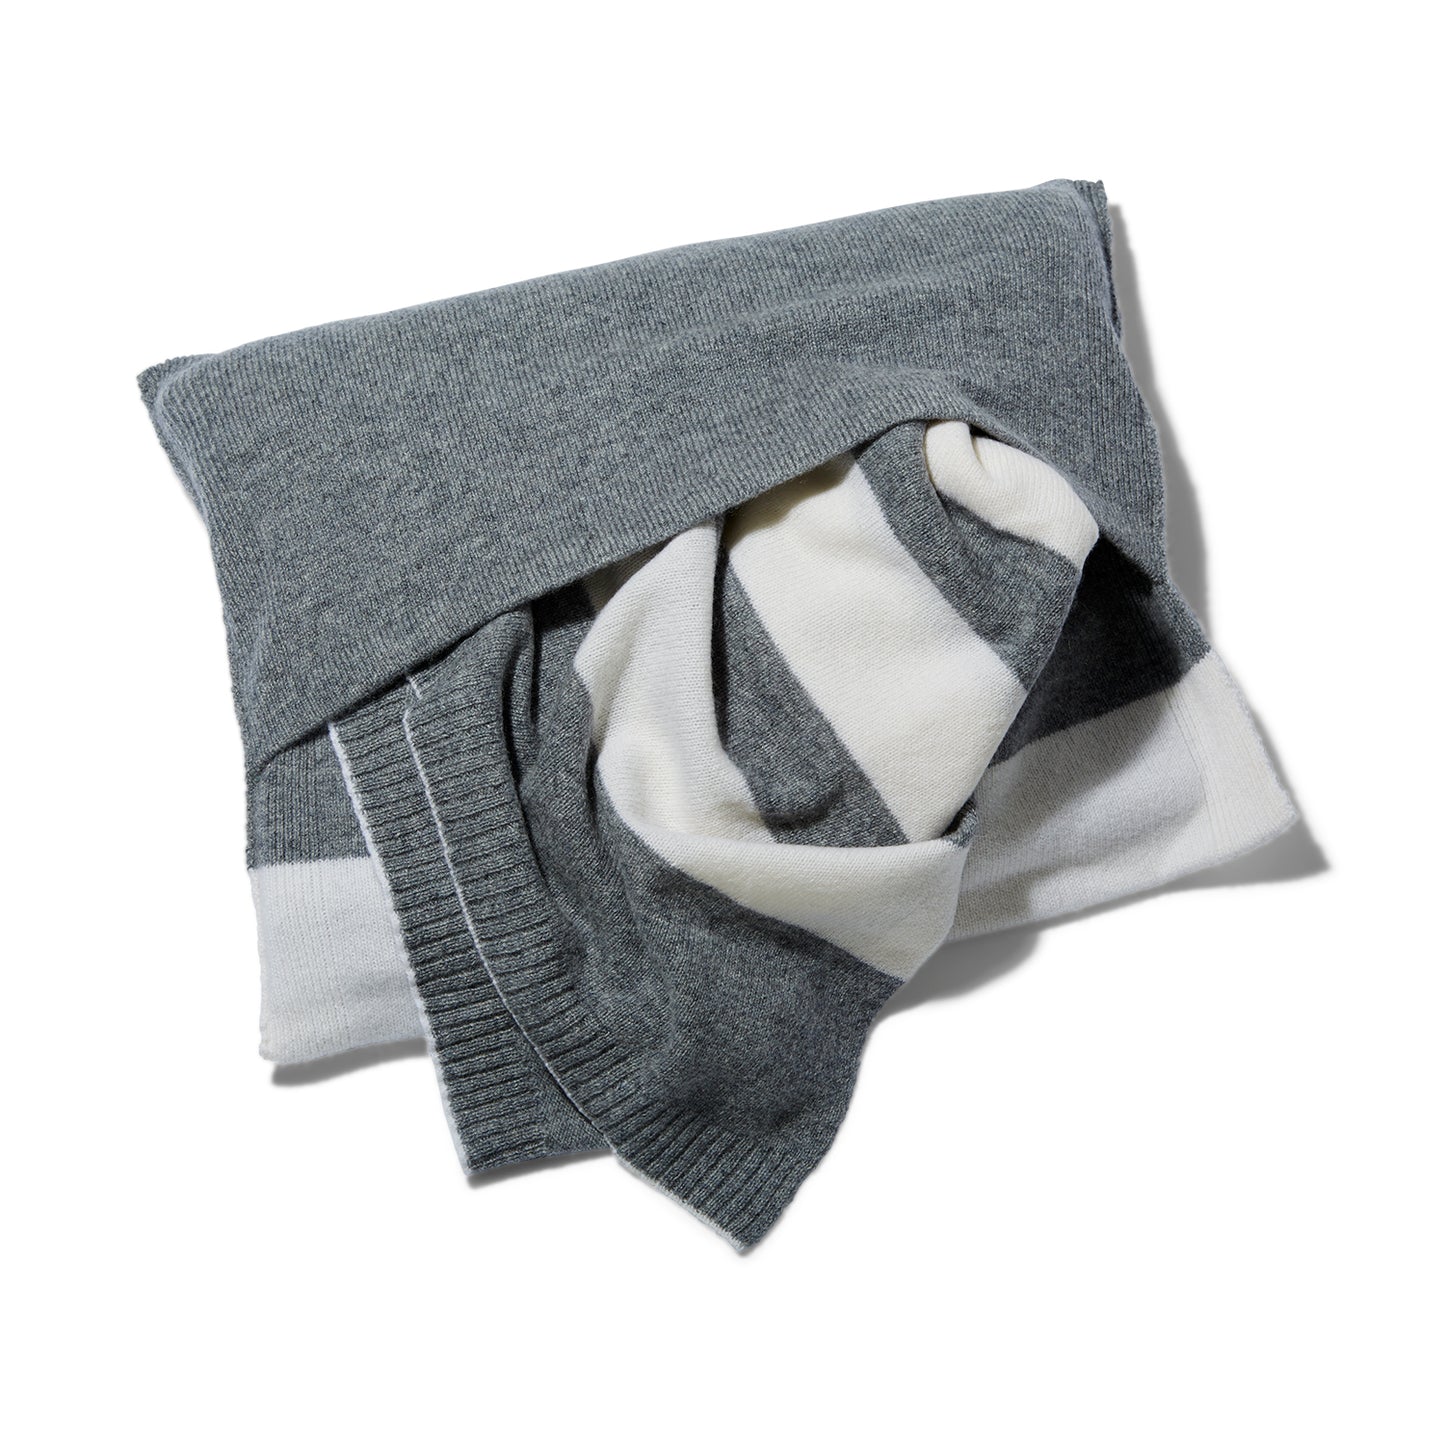 The Reed Clarke Cashmere Travel blanket, a folded grey blanket with wide white stripes shown in the cashmere envelope it comes in. 